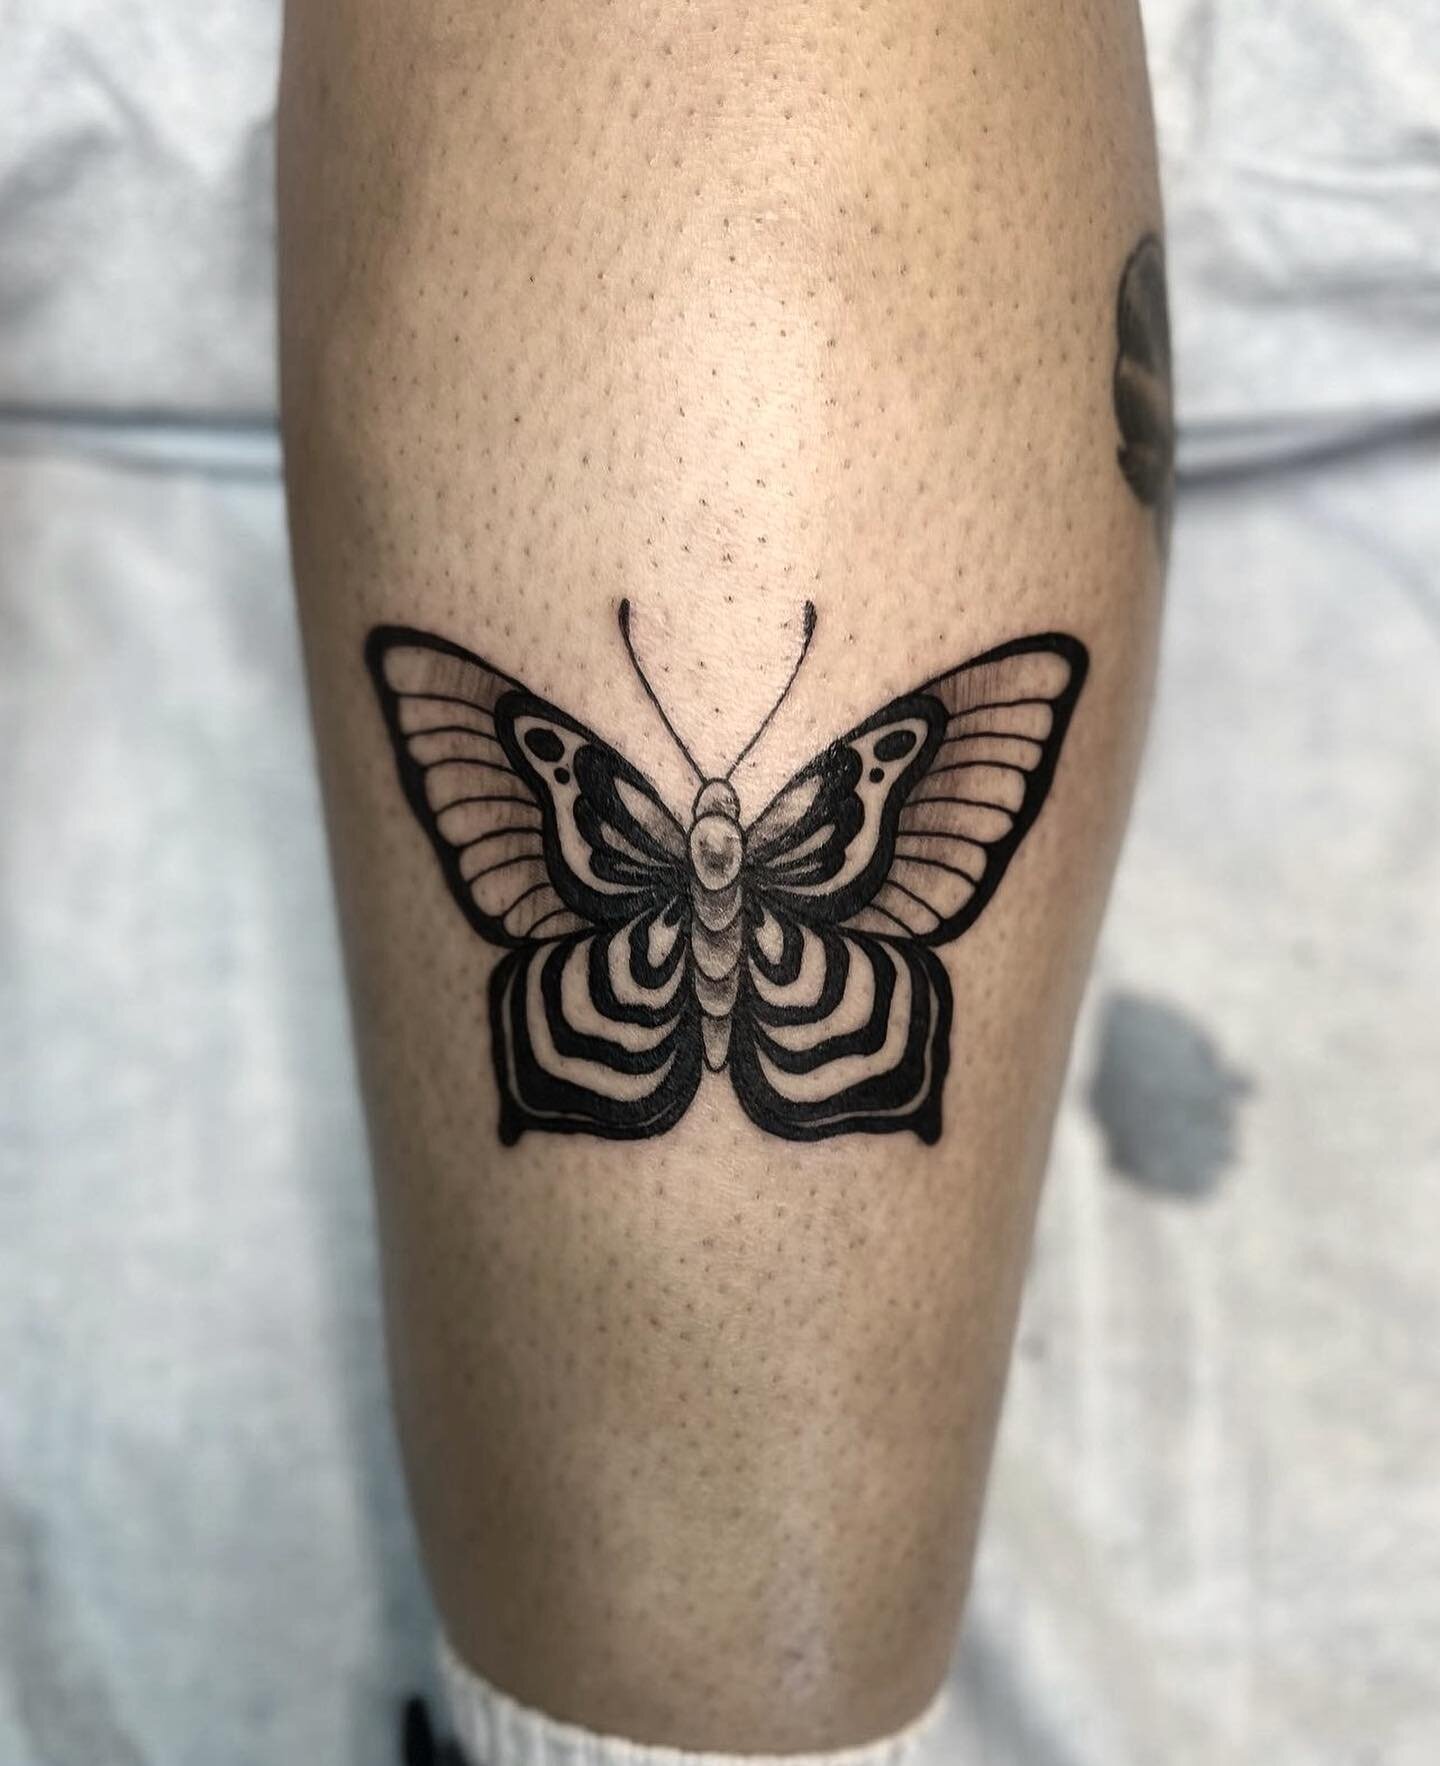 Custom butterfly tattoo by @ashleybucquoy 🦋
She has appointments available this month, contact her to book your next tattoo! 👉@ashleybucquoy
.

Dark Atelier Tattoo
🏰1115 Front St. in Old Sac
☎️(916)573-3225
.
.
.
.
.
.
.
.
.
.
.
#california #sacra